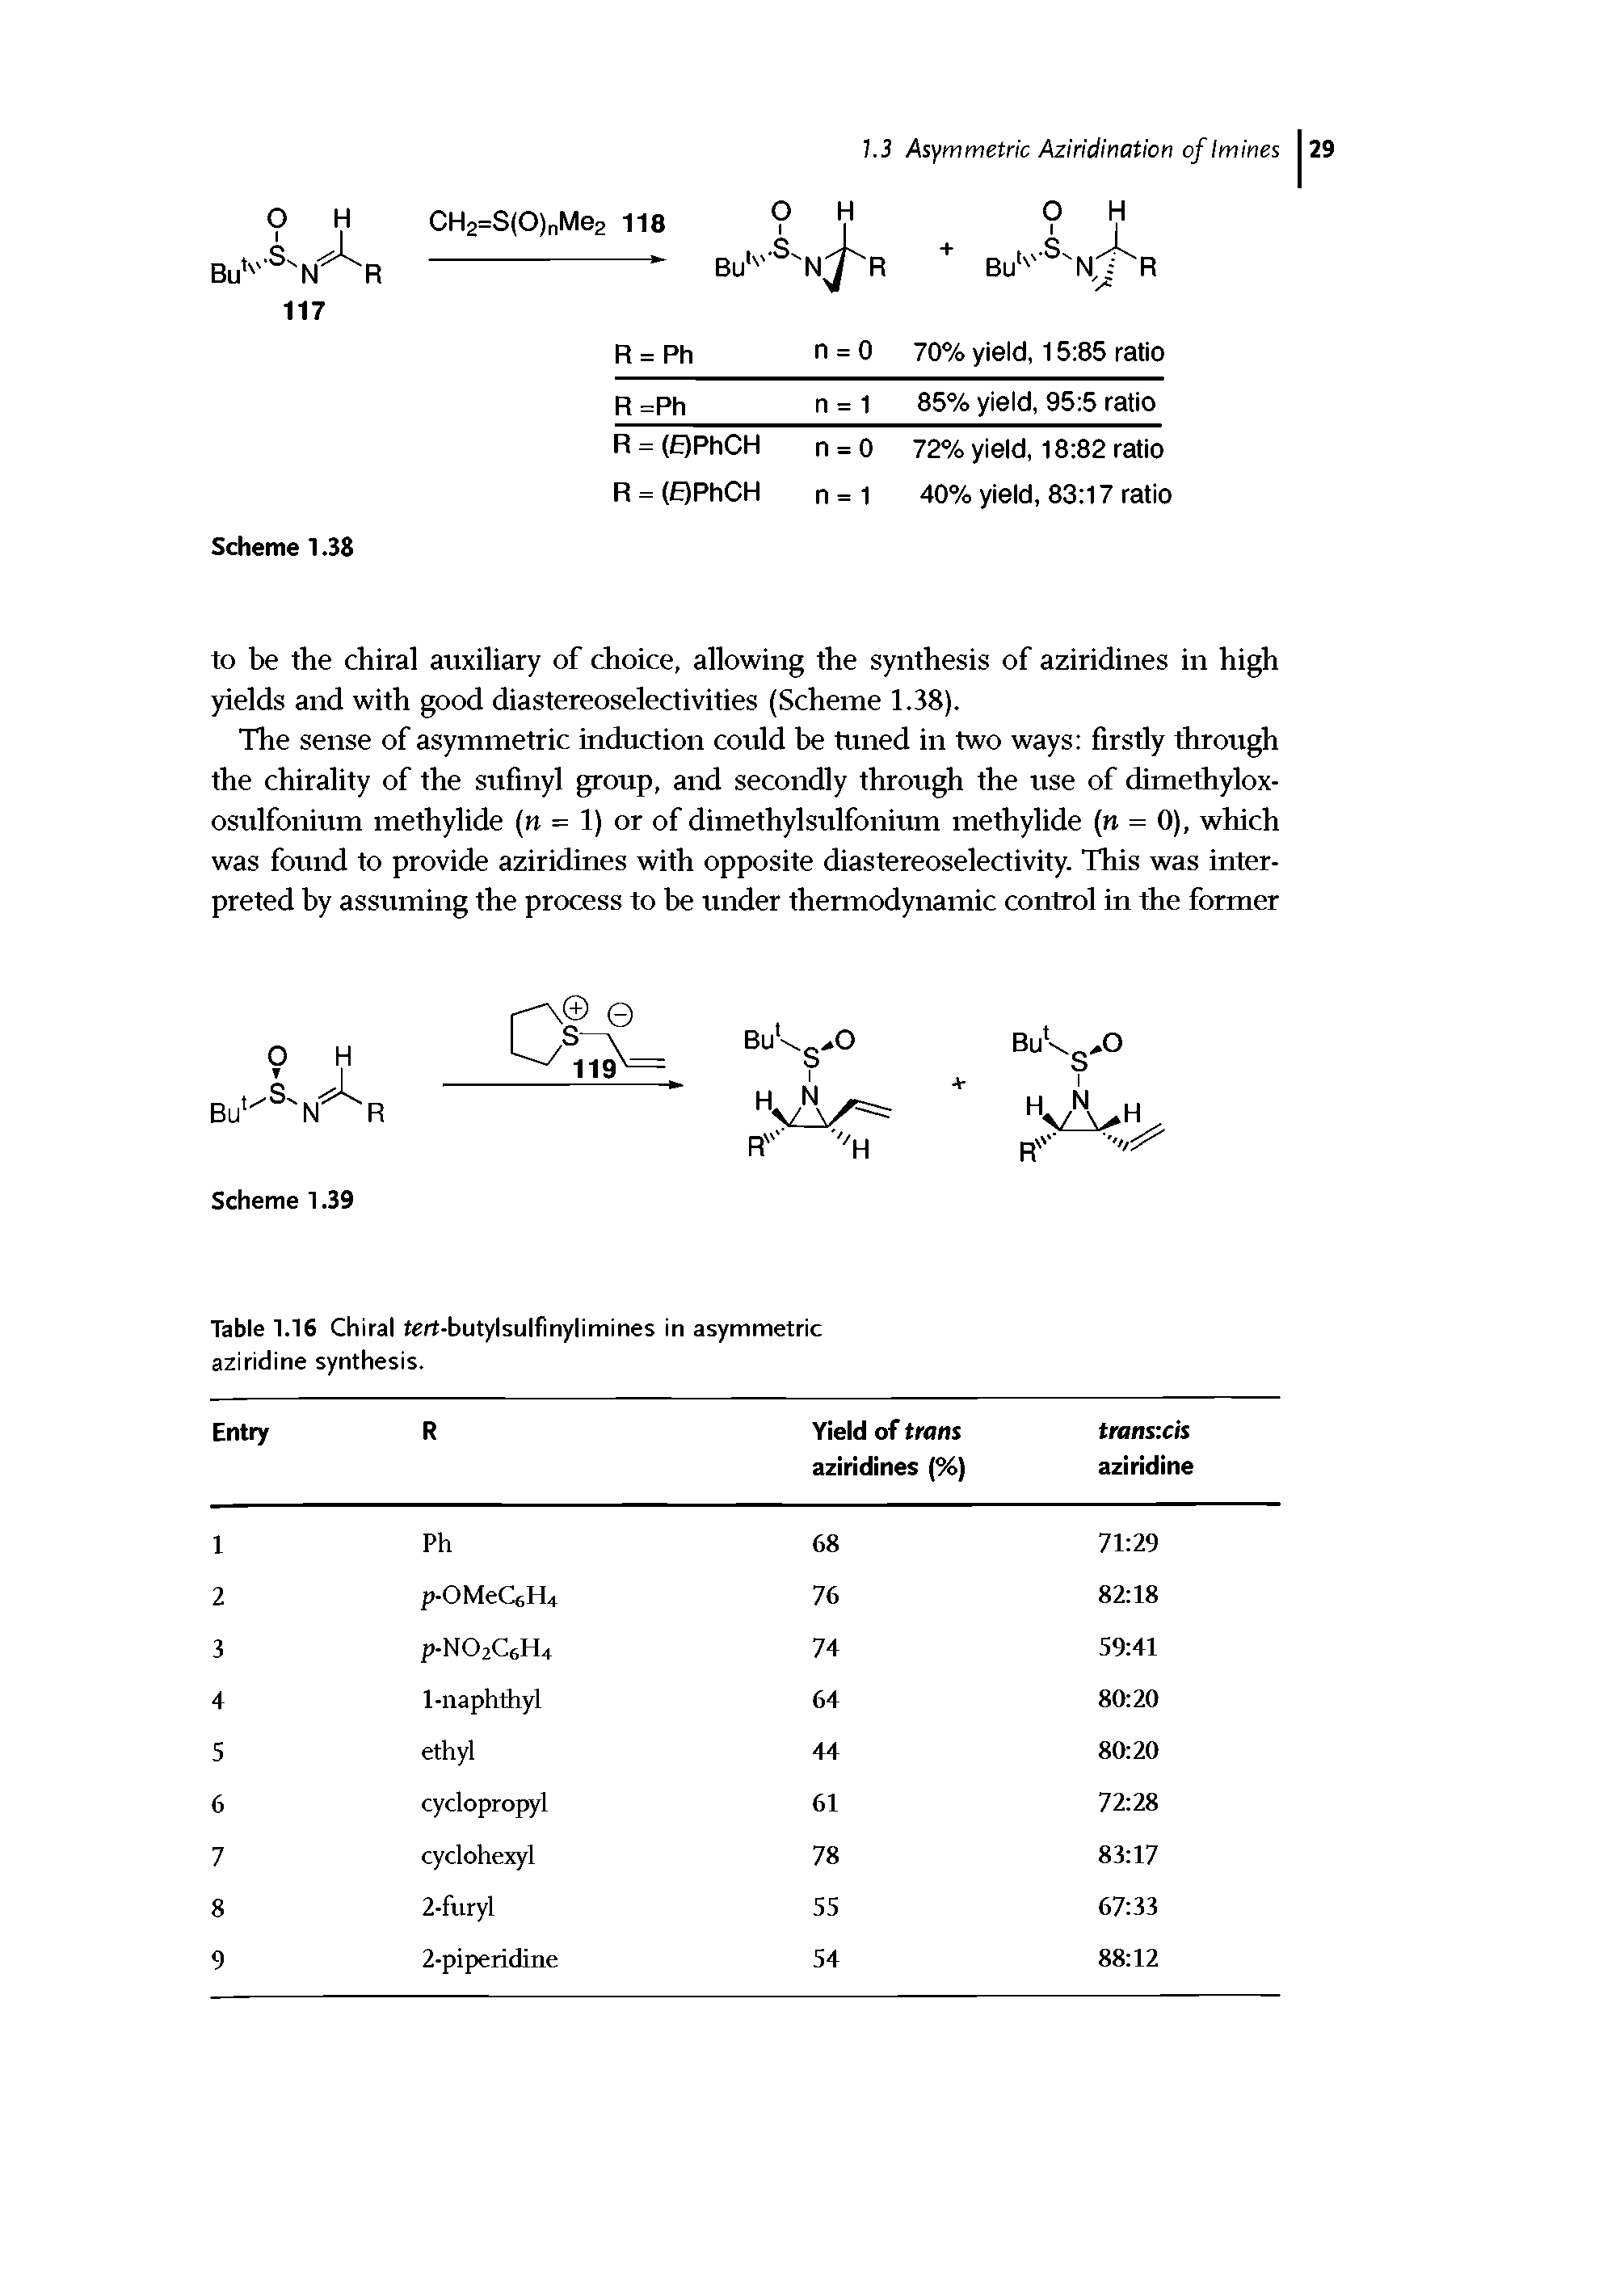 Table 1.16 Chiral tert-butylsulfinylimines in asymmetric aziridine synthesis.